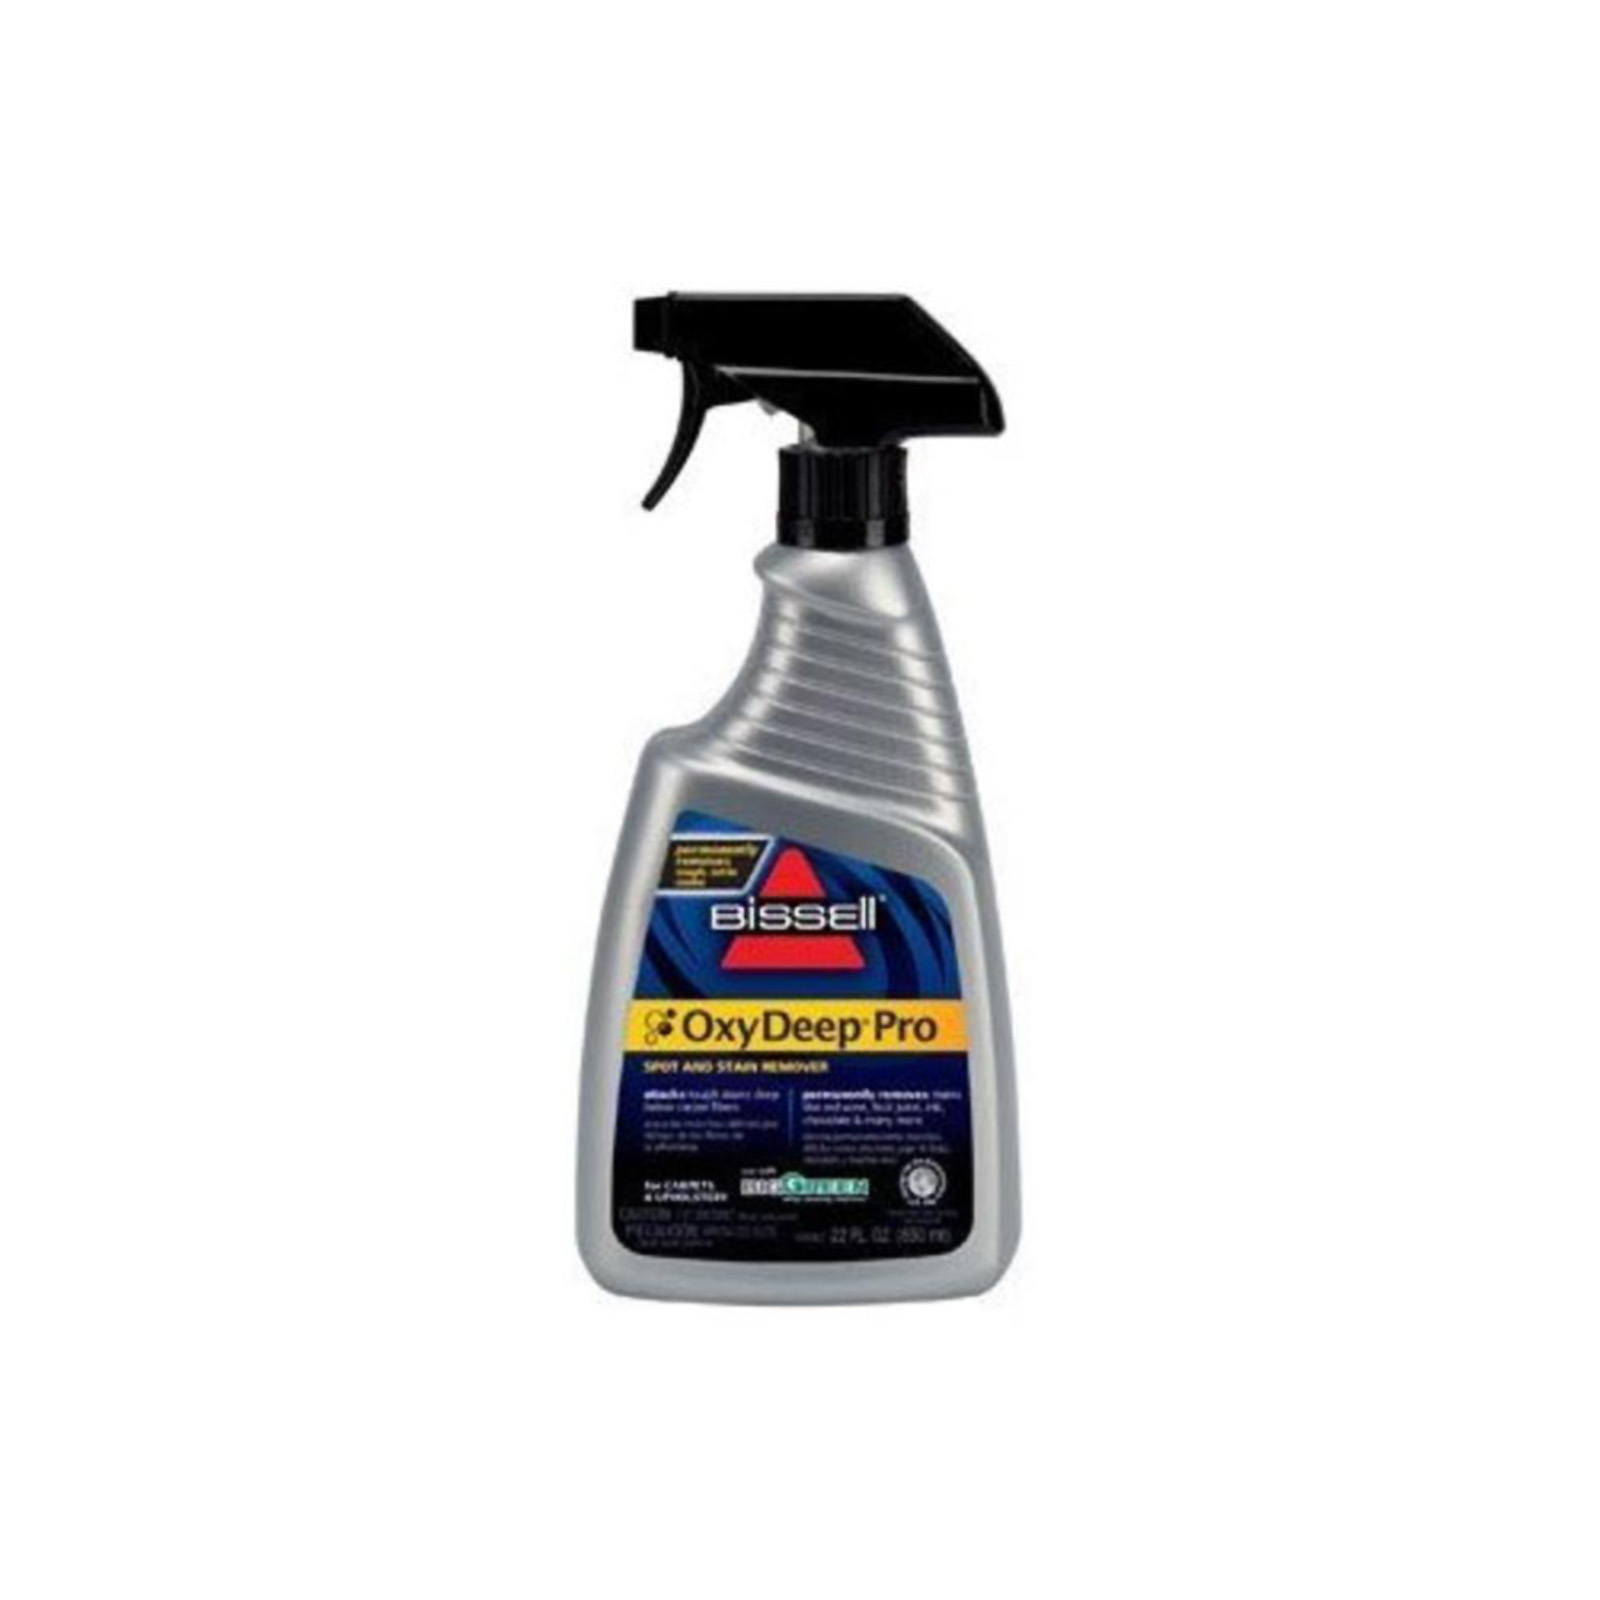 Bissell OxyDeep Pro 22oz. Spot And Stain Remover